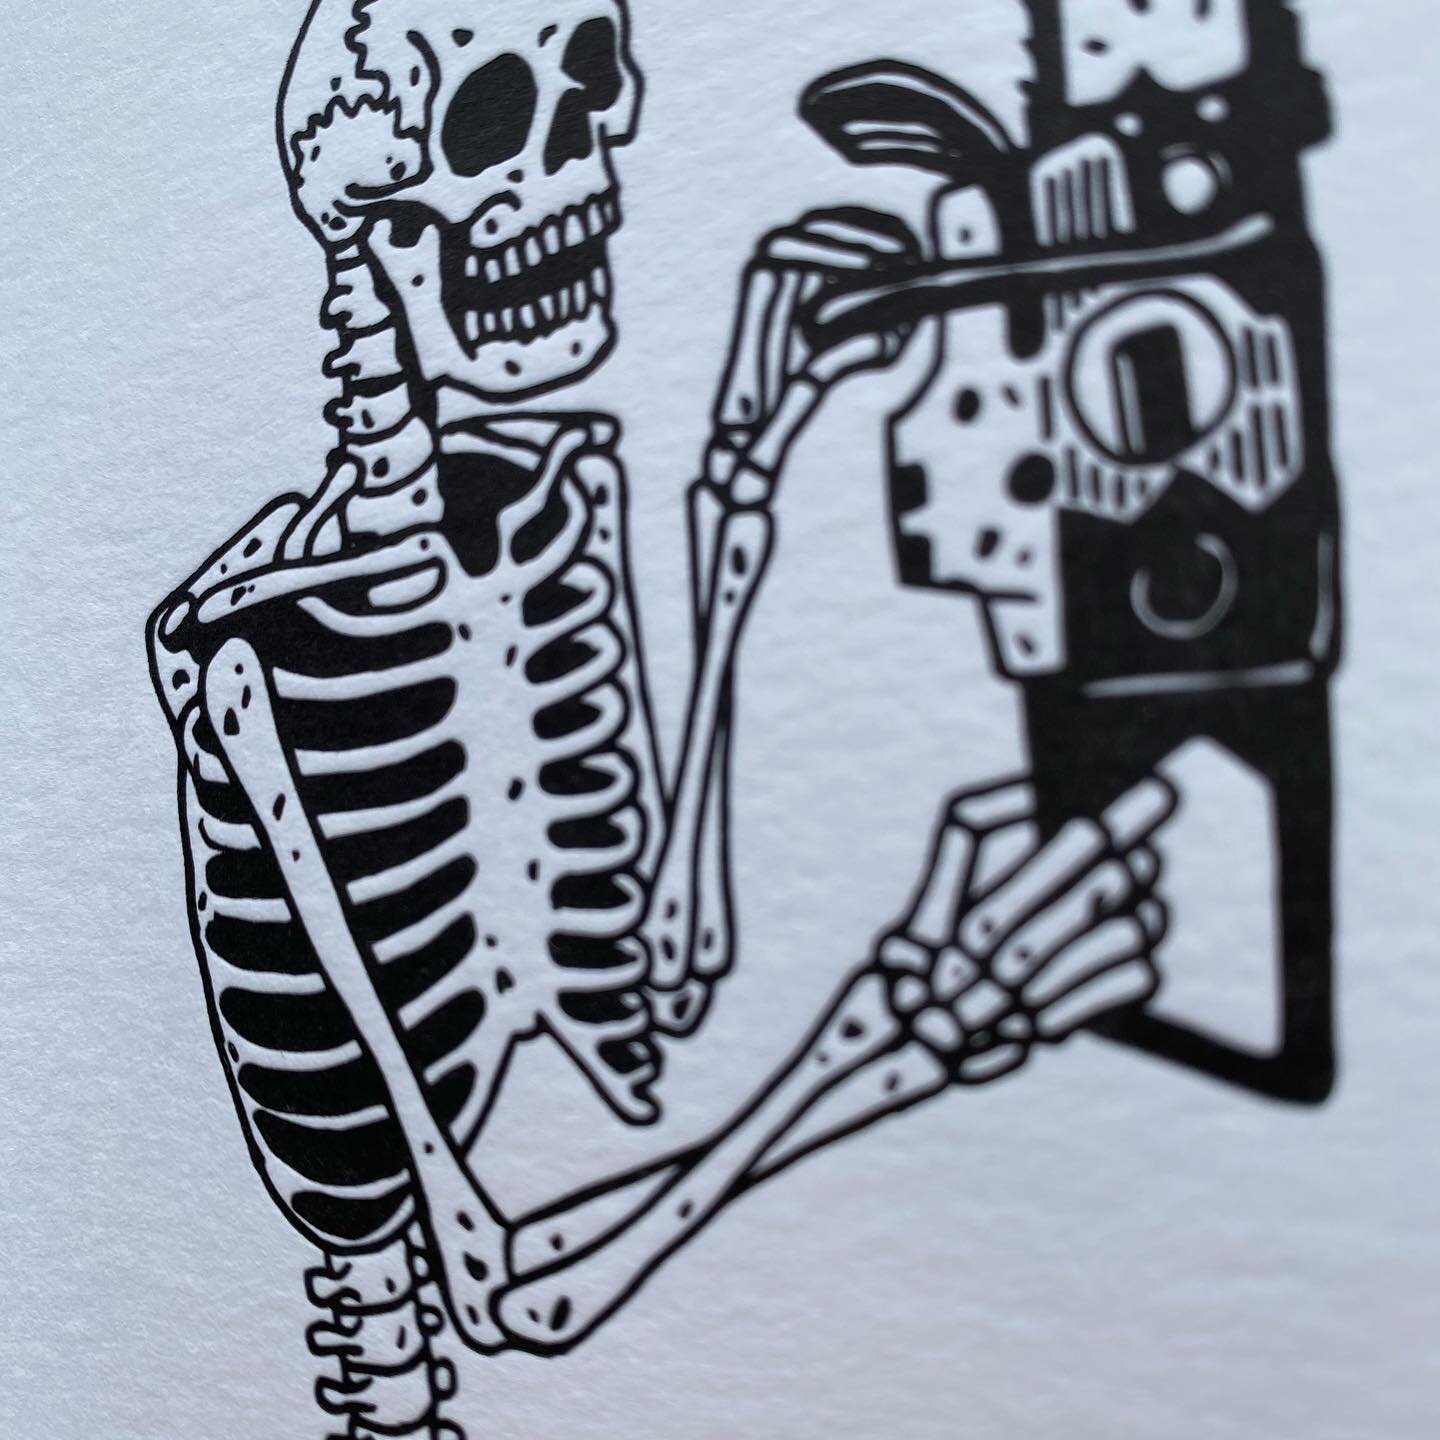 Greeting cards now up in the shop! Made with love and care by the folks over at @saplingpress ! Link in bio,logy department☝️☝️☝️🧐🧐🧐. (Options to personalize available!)
.
.
.
#valentinesday #valentine #beebosloth #skeleton #chainsaw #horrormovies